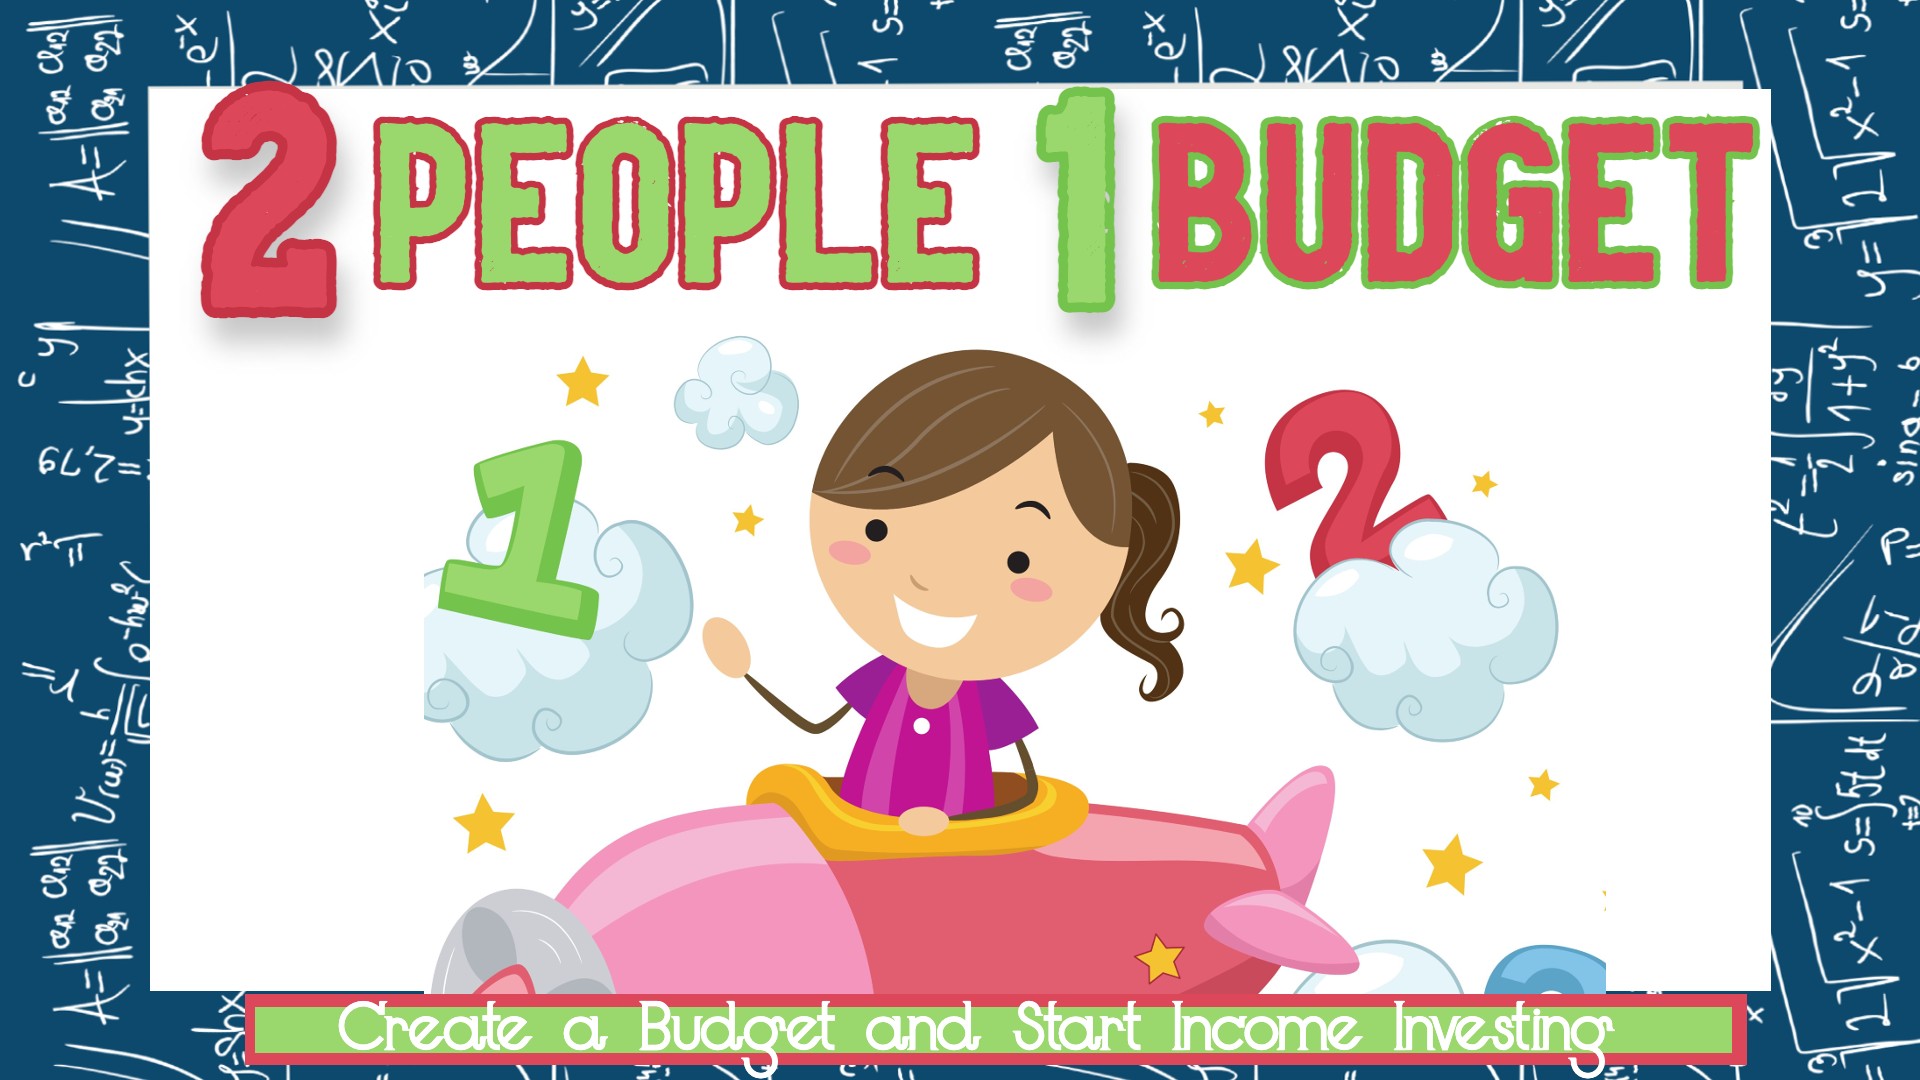 Two People, One Budget: Create a Budget and Start Income Investing